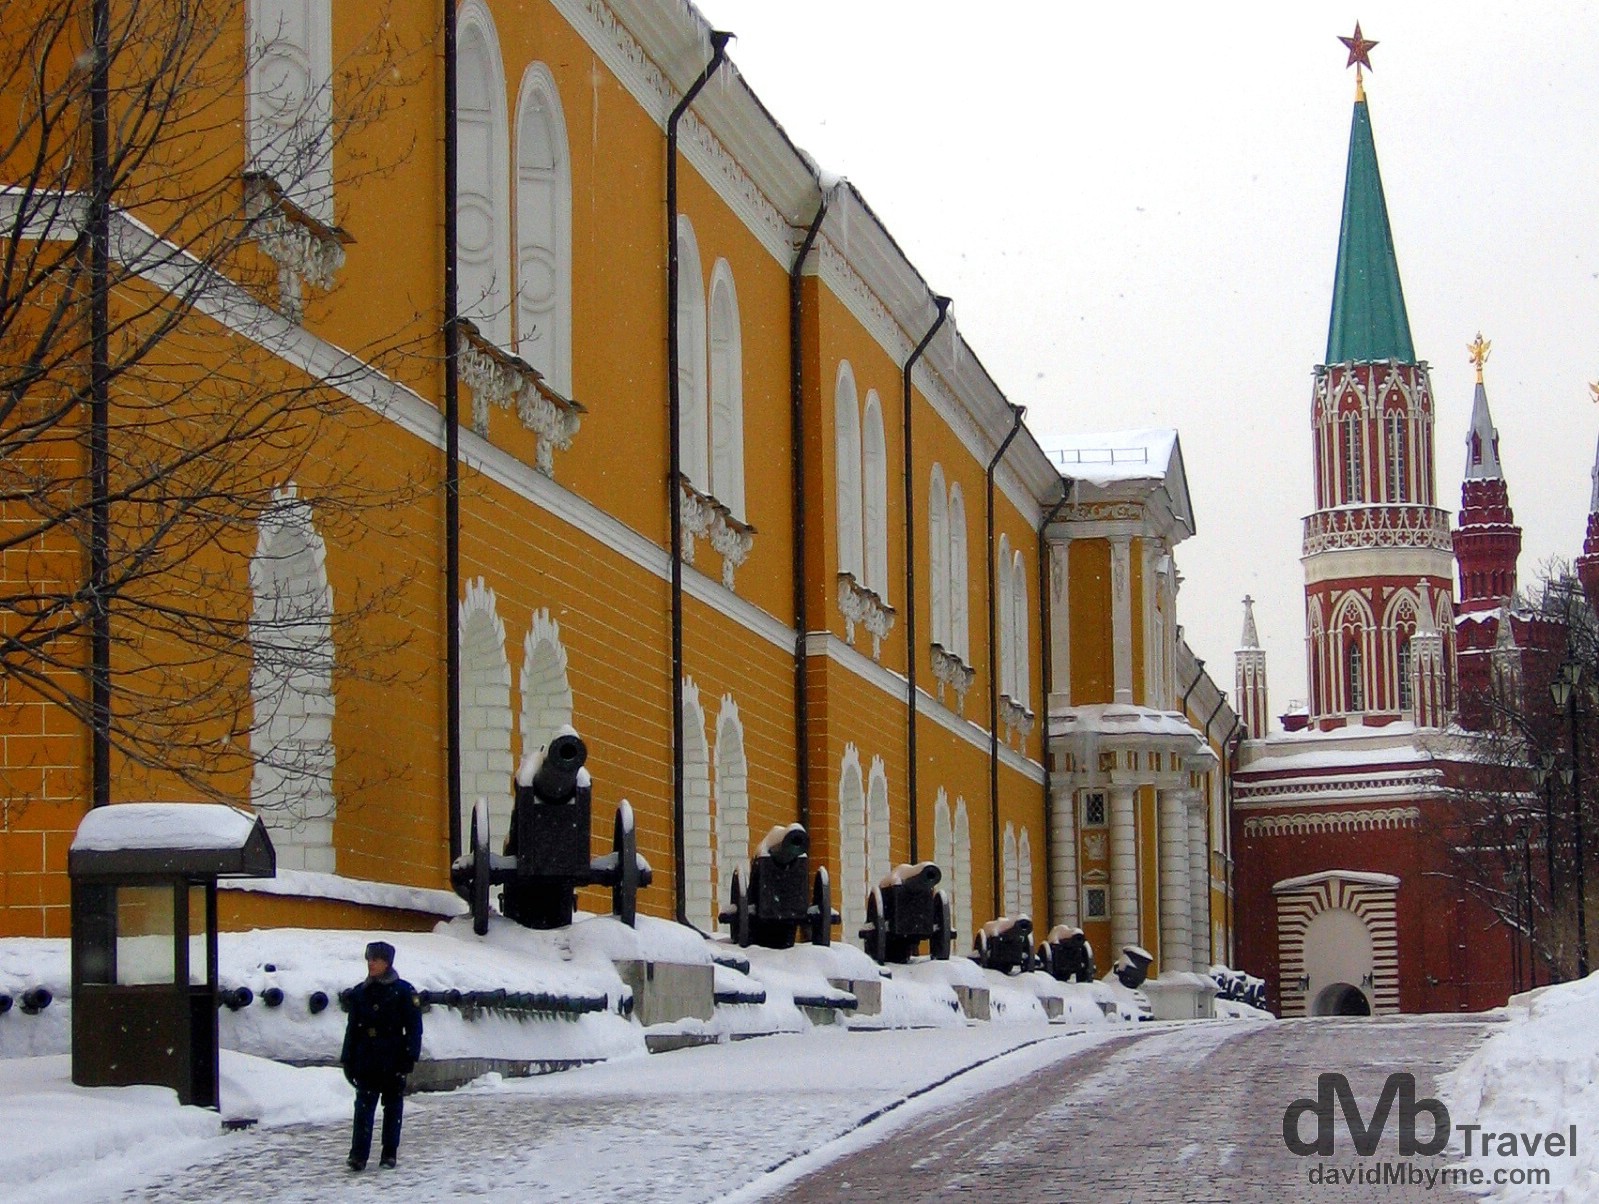 Inside the grounds of the Kremlin in Moscow, Russia. February 26, 2006.